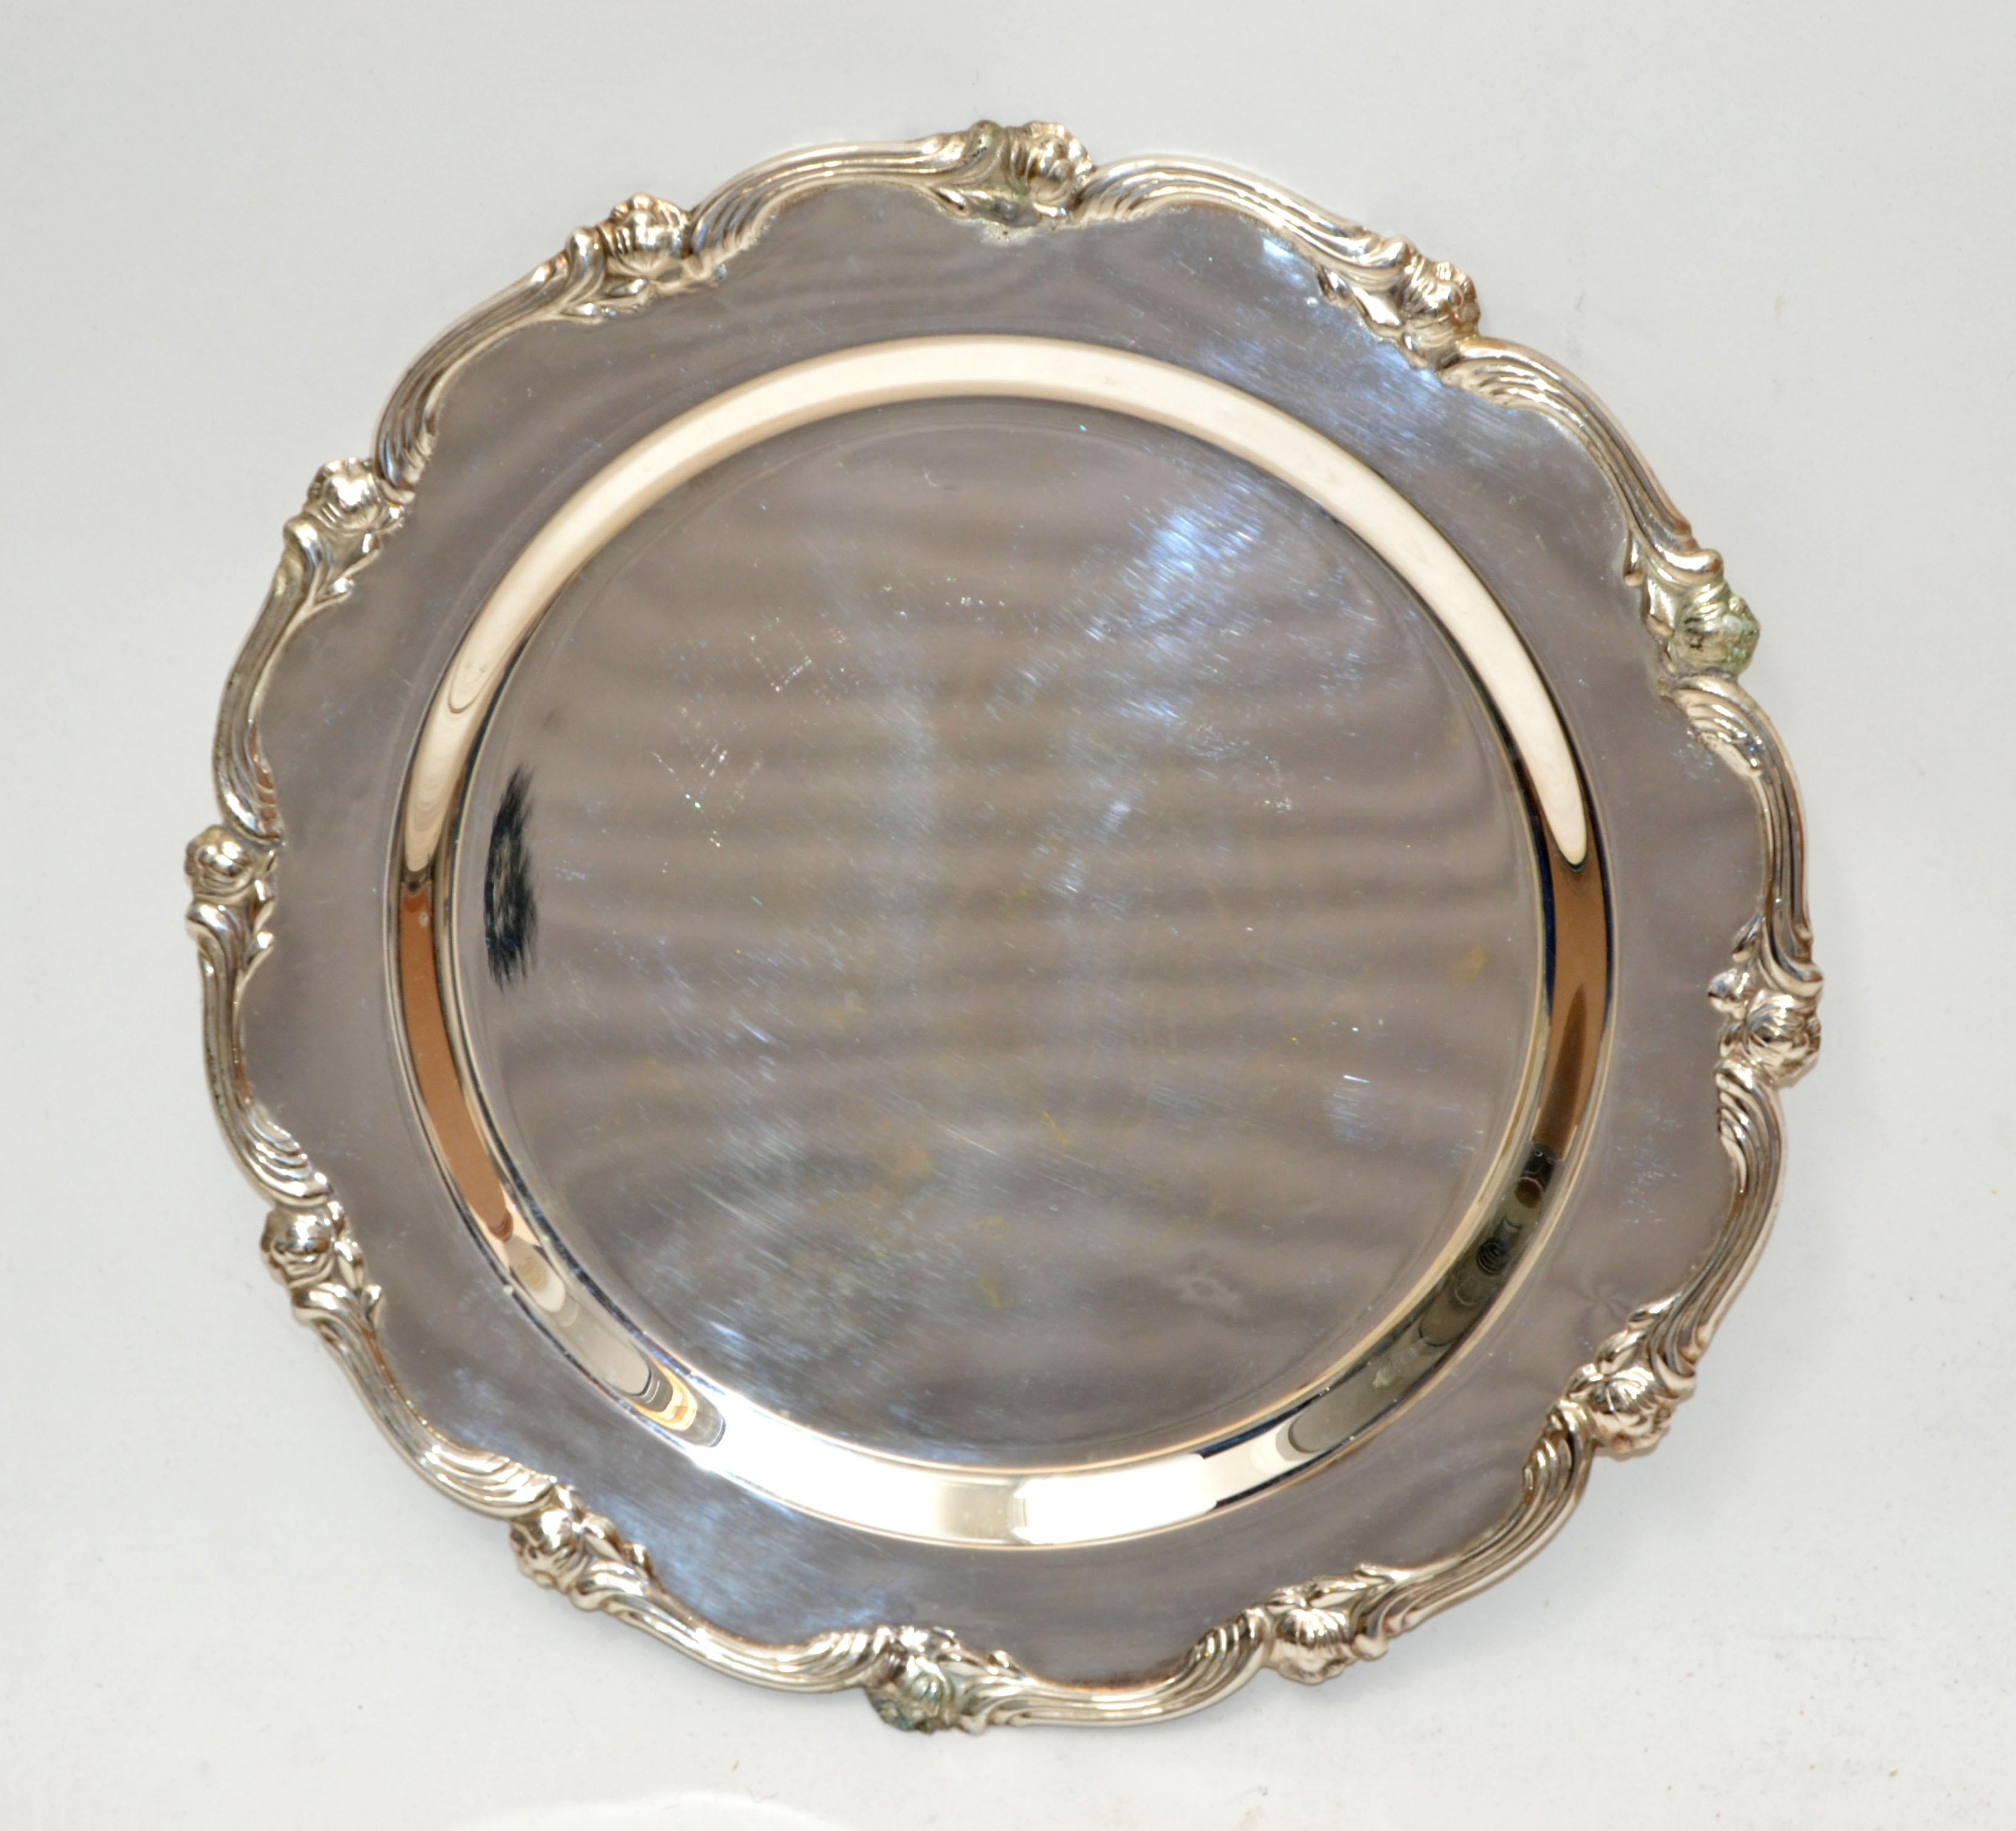 Elegant handmade set of eight finest silver plate serving chargers underplates mats. 
Measure: Gadroon edged 11.5 inches diameter, lightly used and minor signs of wear.
Have the original red felt protectors in between.
Marked under each plate: